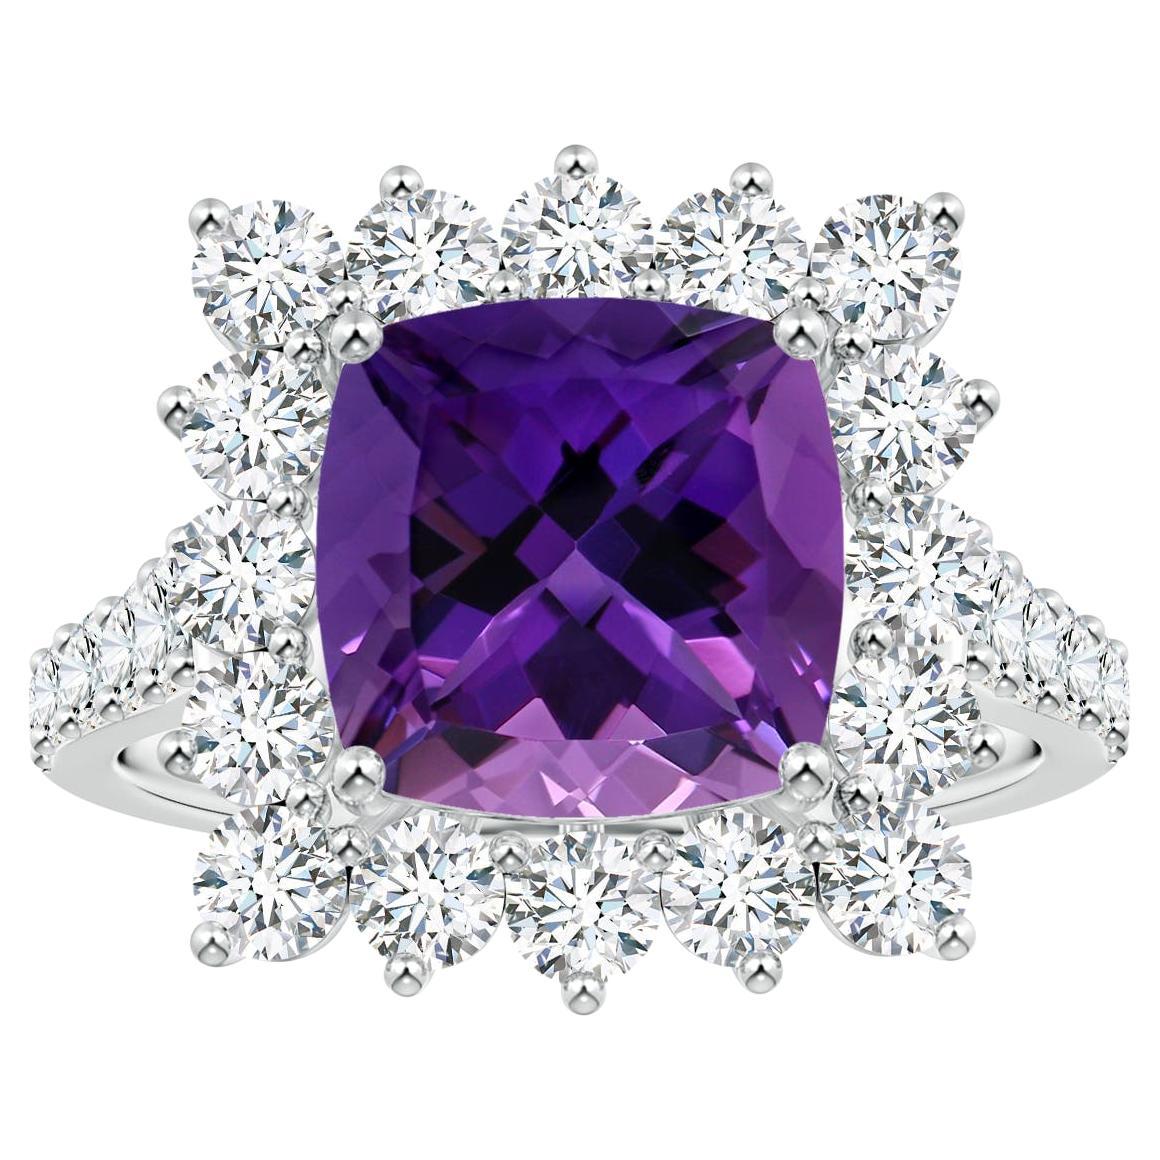 For Sale:  Angara Princess Diana Inspired Gia Certified Cushion Amethyst Ring in White Gold